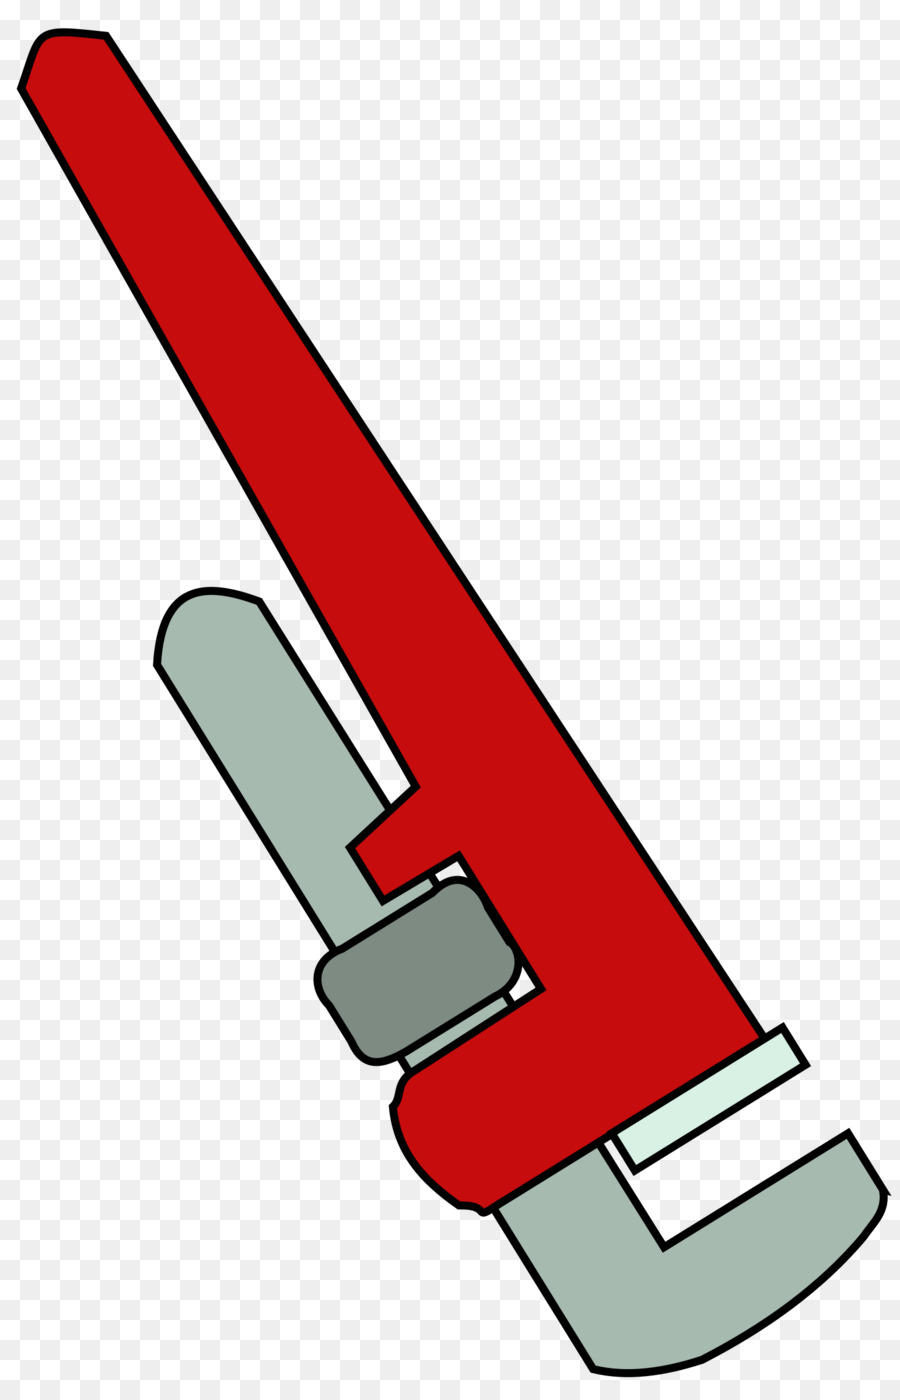 pipe wrench clipart Pipe wrench Spanners Clip art clipart.